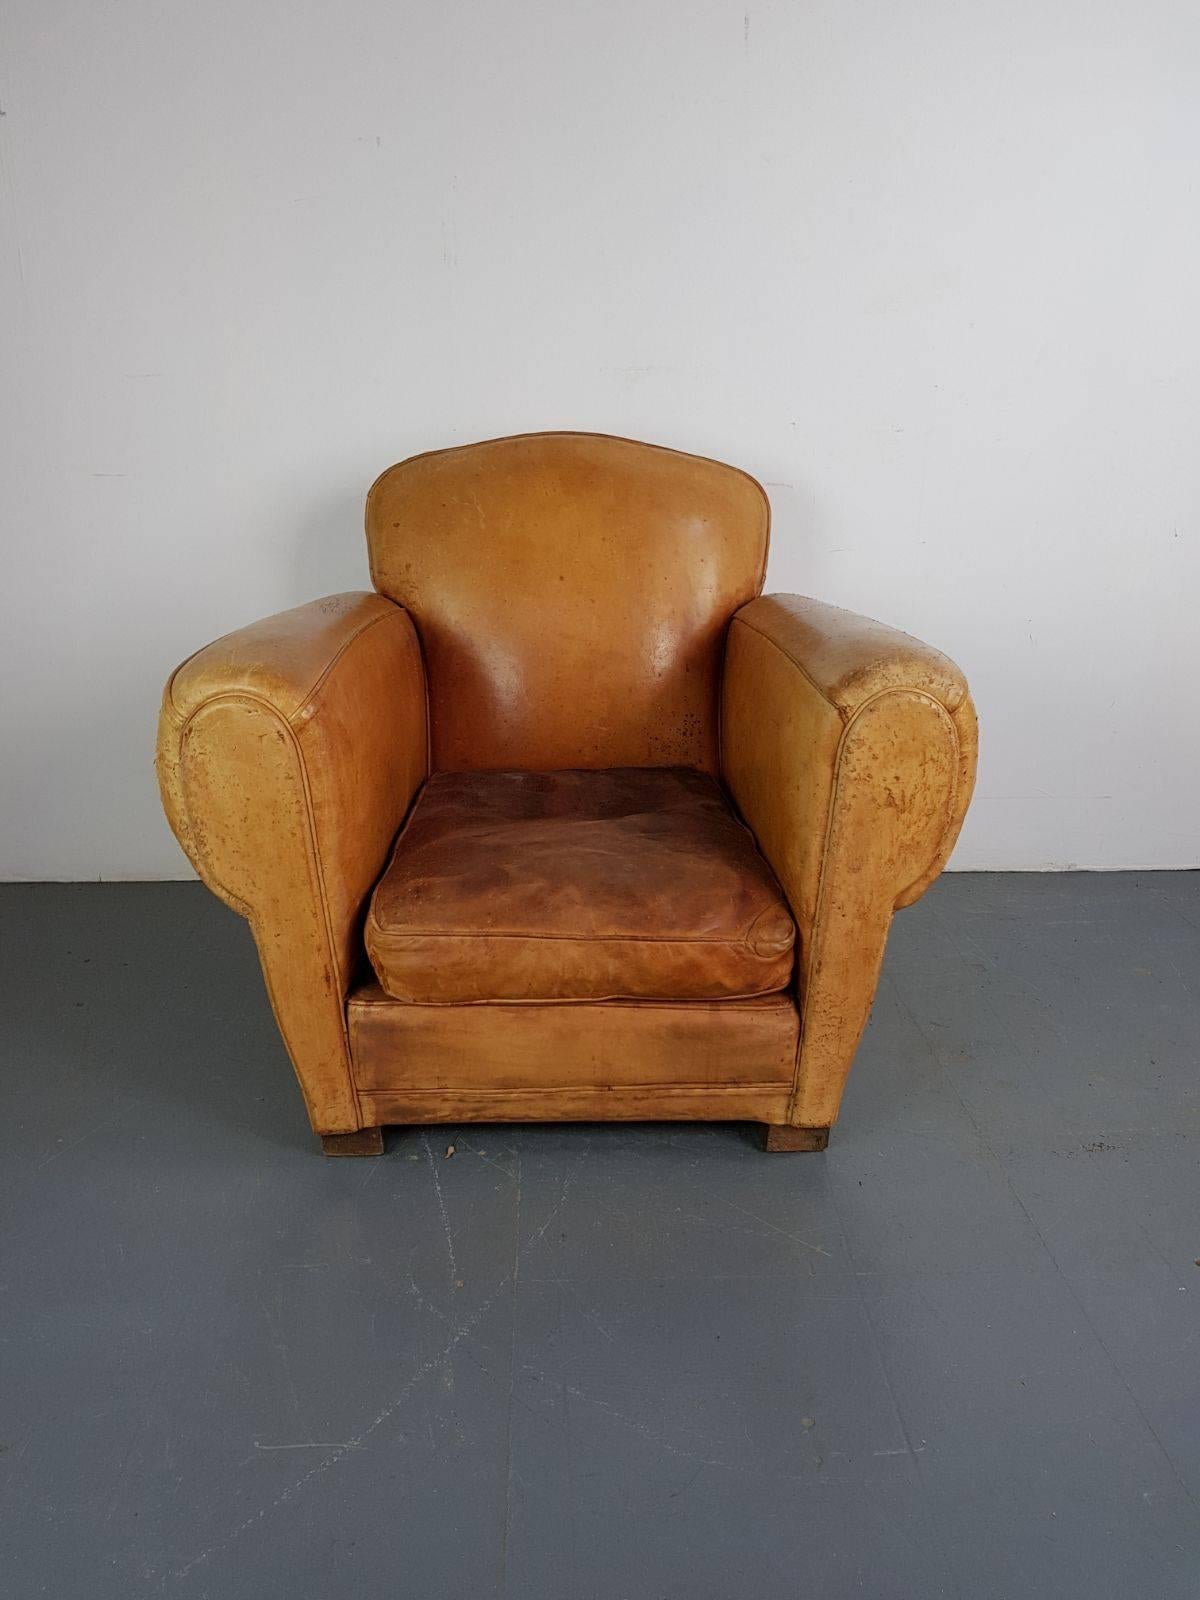 Vintage French Leather Club Chair In Fair Condition For Sale In Lewes, East Sussex